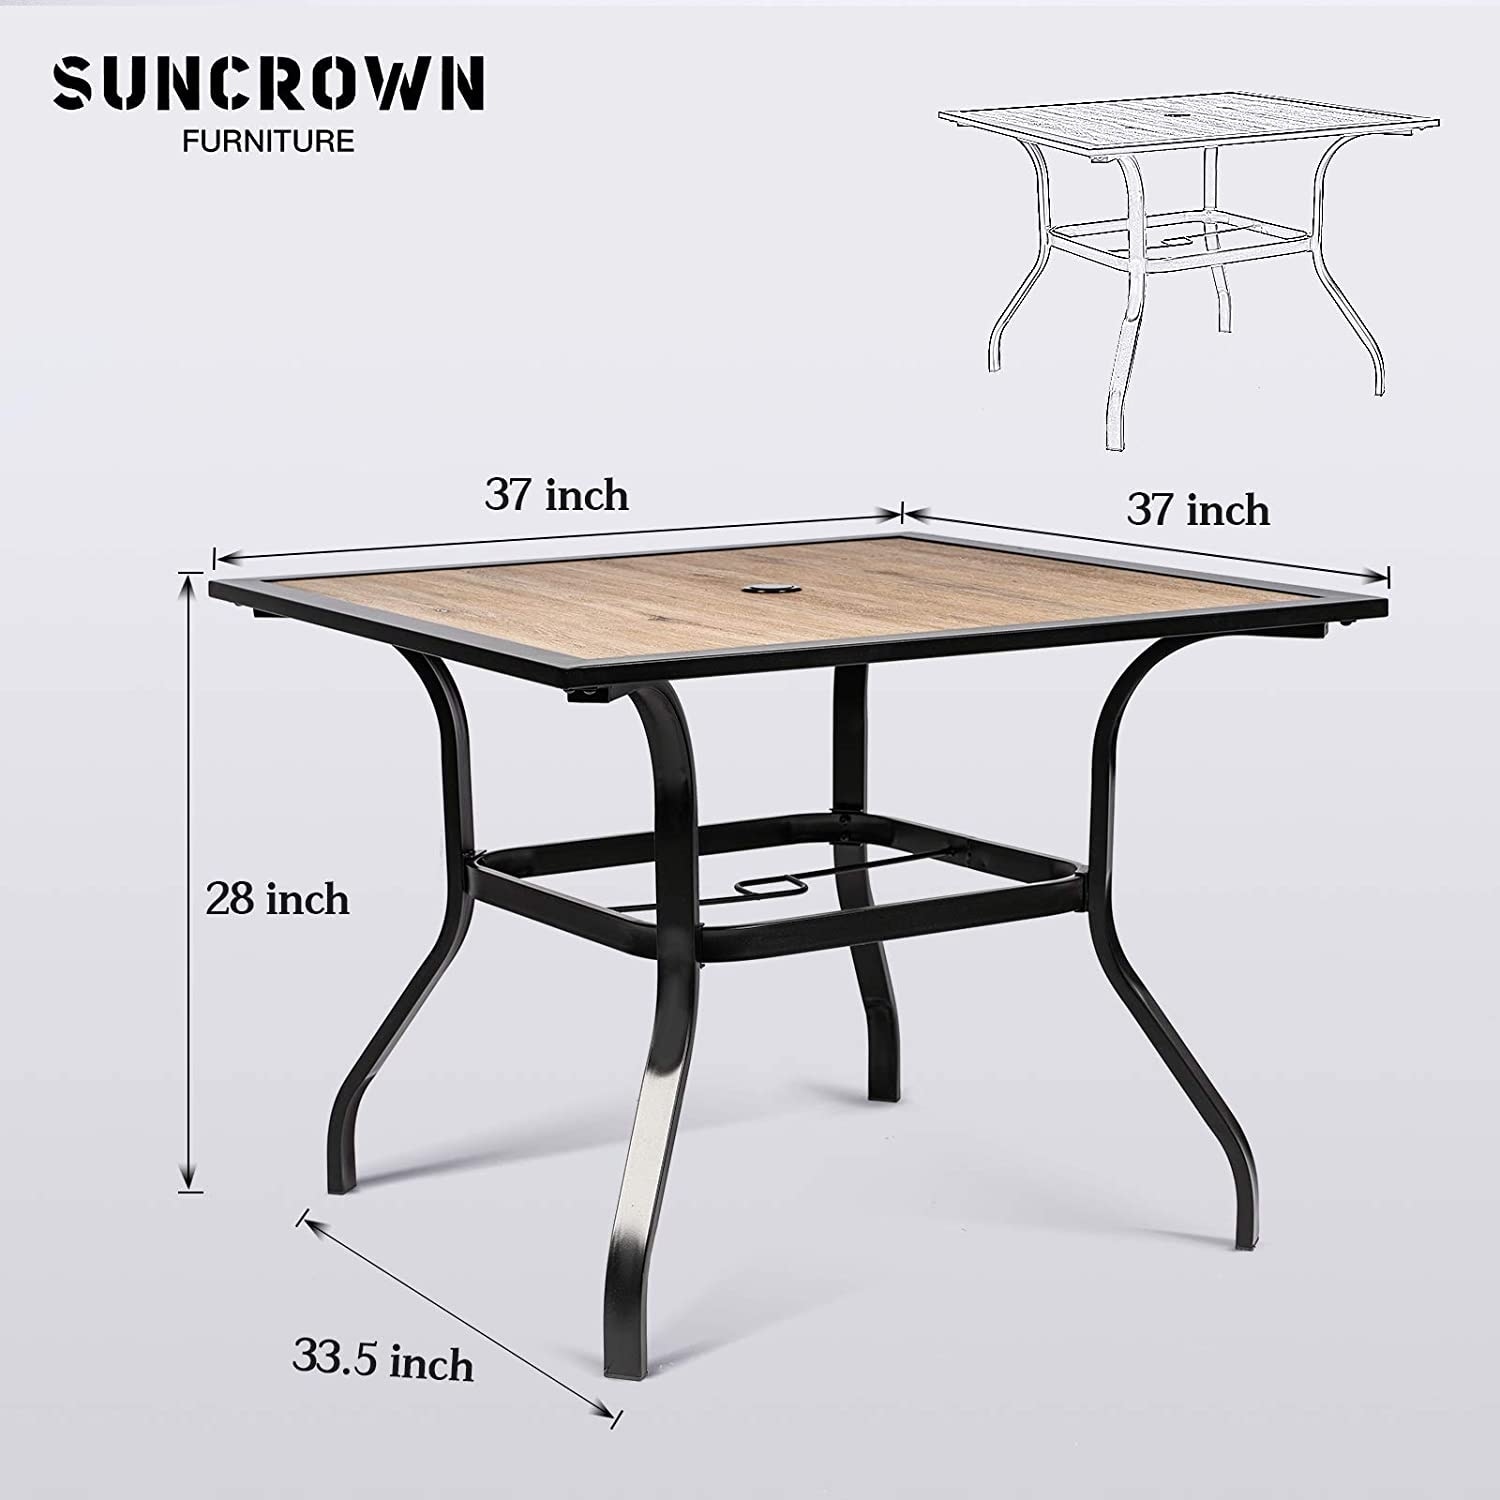 SUNCROWN 37 Patio Outdoor Dining Table Wooden Top Square Bistro Table for Porch Deck Garden Backyard Poolside 1.57 Umbrella Hole 